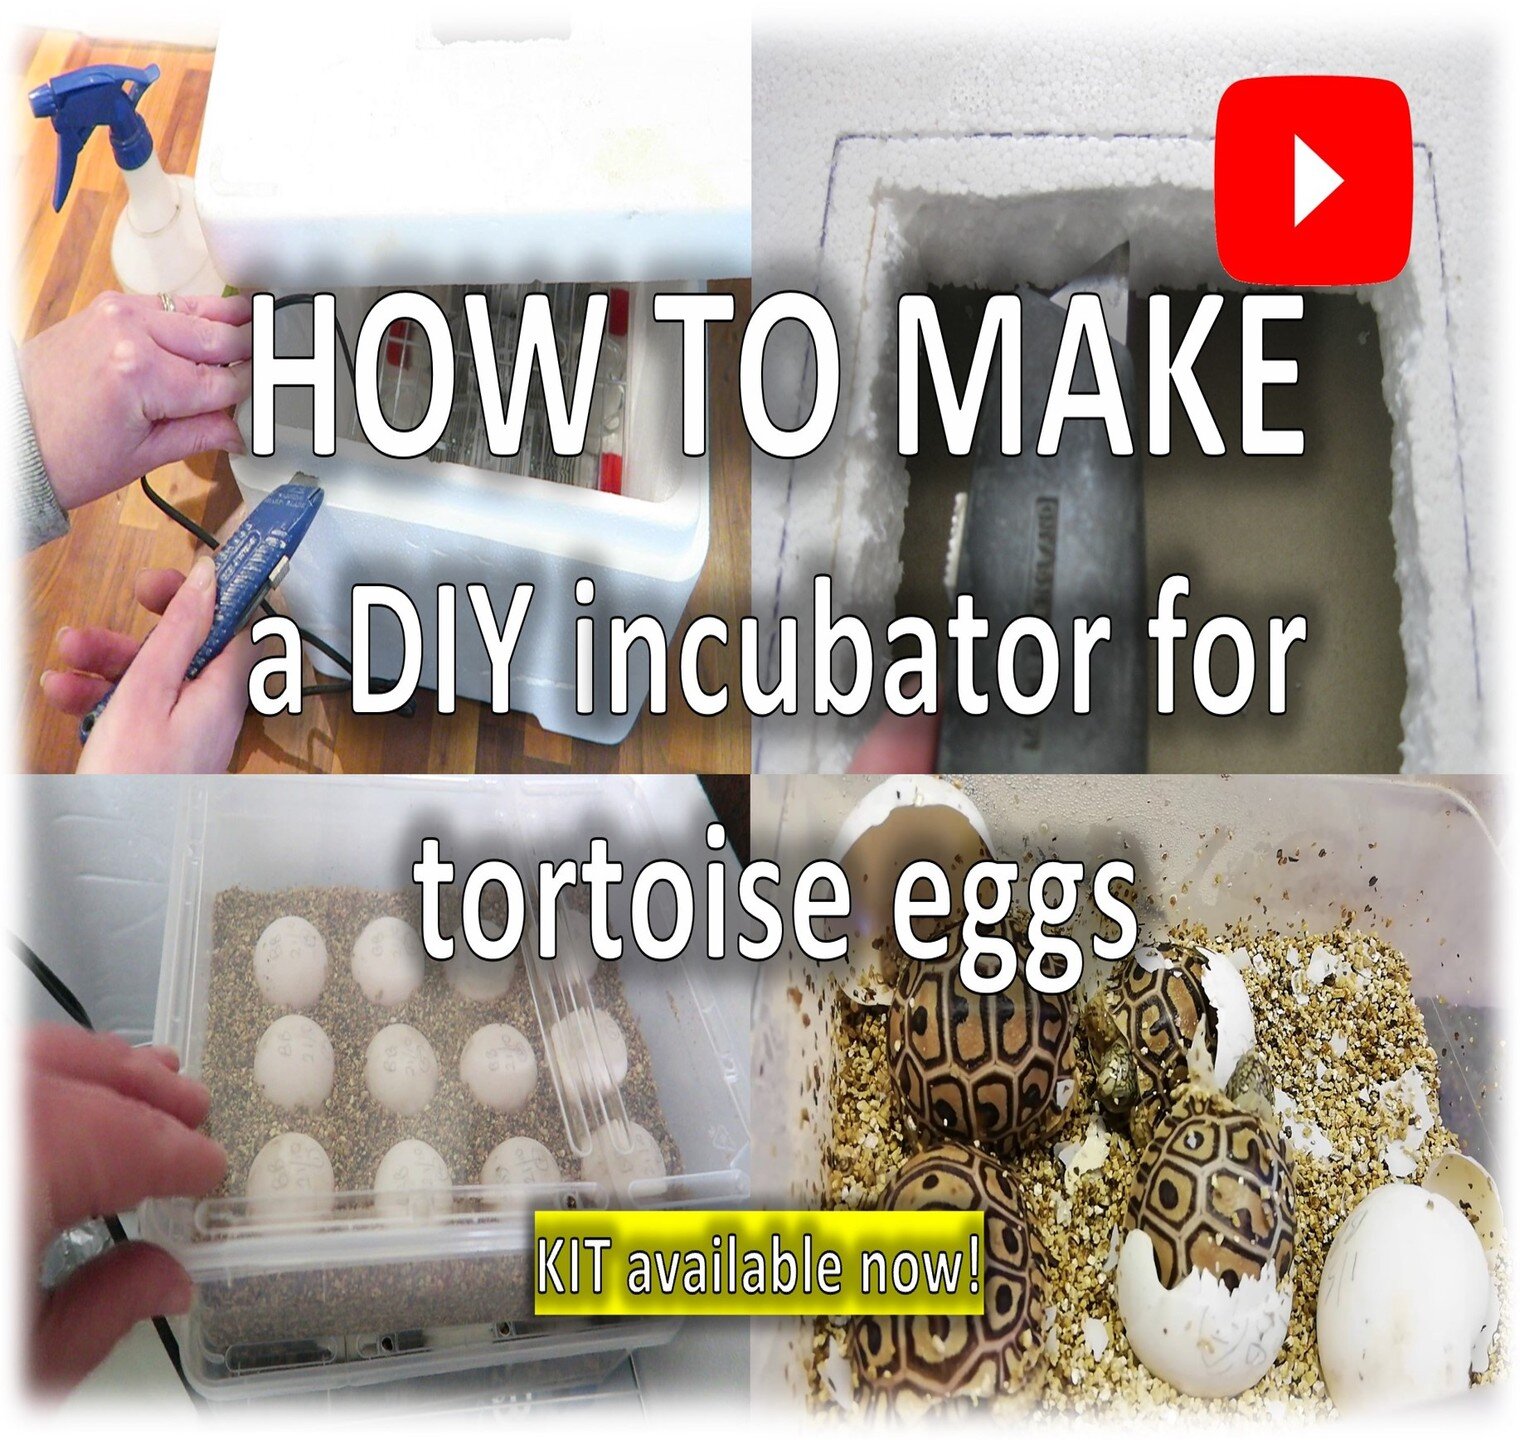 It been a while but I have a brand new video for you to watch - &quot;How to make an incubator for hatching tortoise eggs!&quot; 🎉 There may even be some cute baby tortoises hatching in the video too! #incubator #tortoiseeggs #reptileeggs #reptileeg